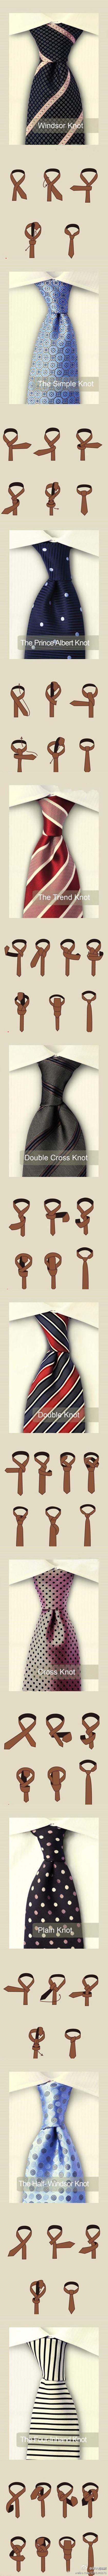 how to tie a tie.